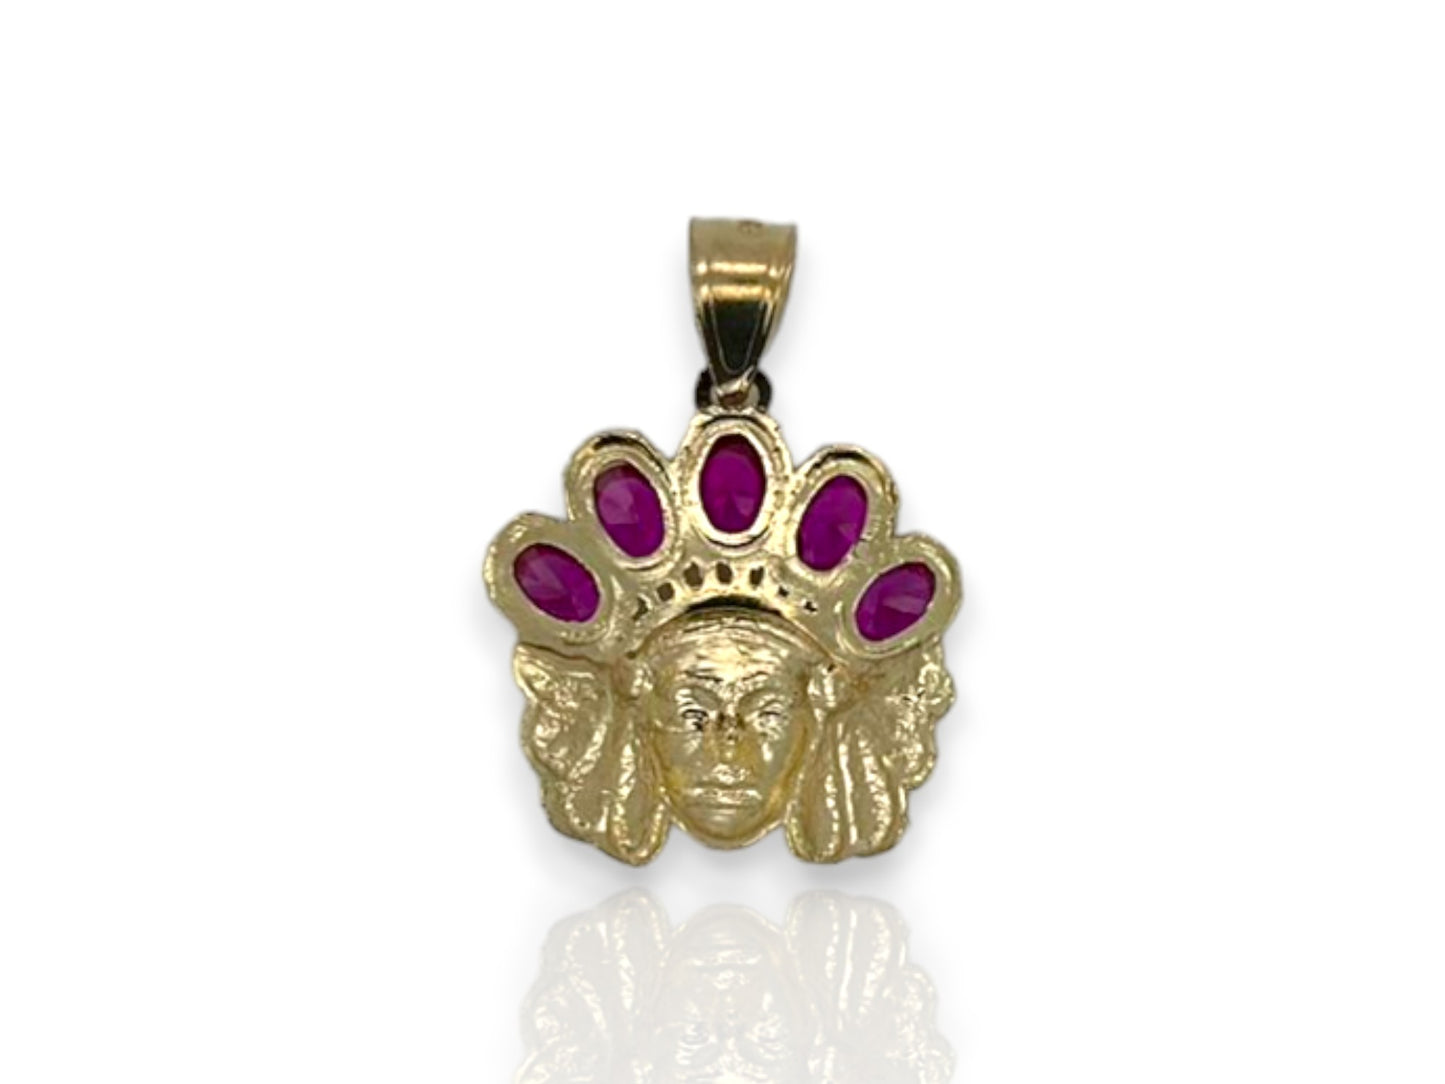 American Native Indian "Chief" Gem Pendant CZ - 10k Yellow Gold